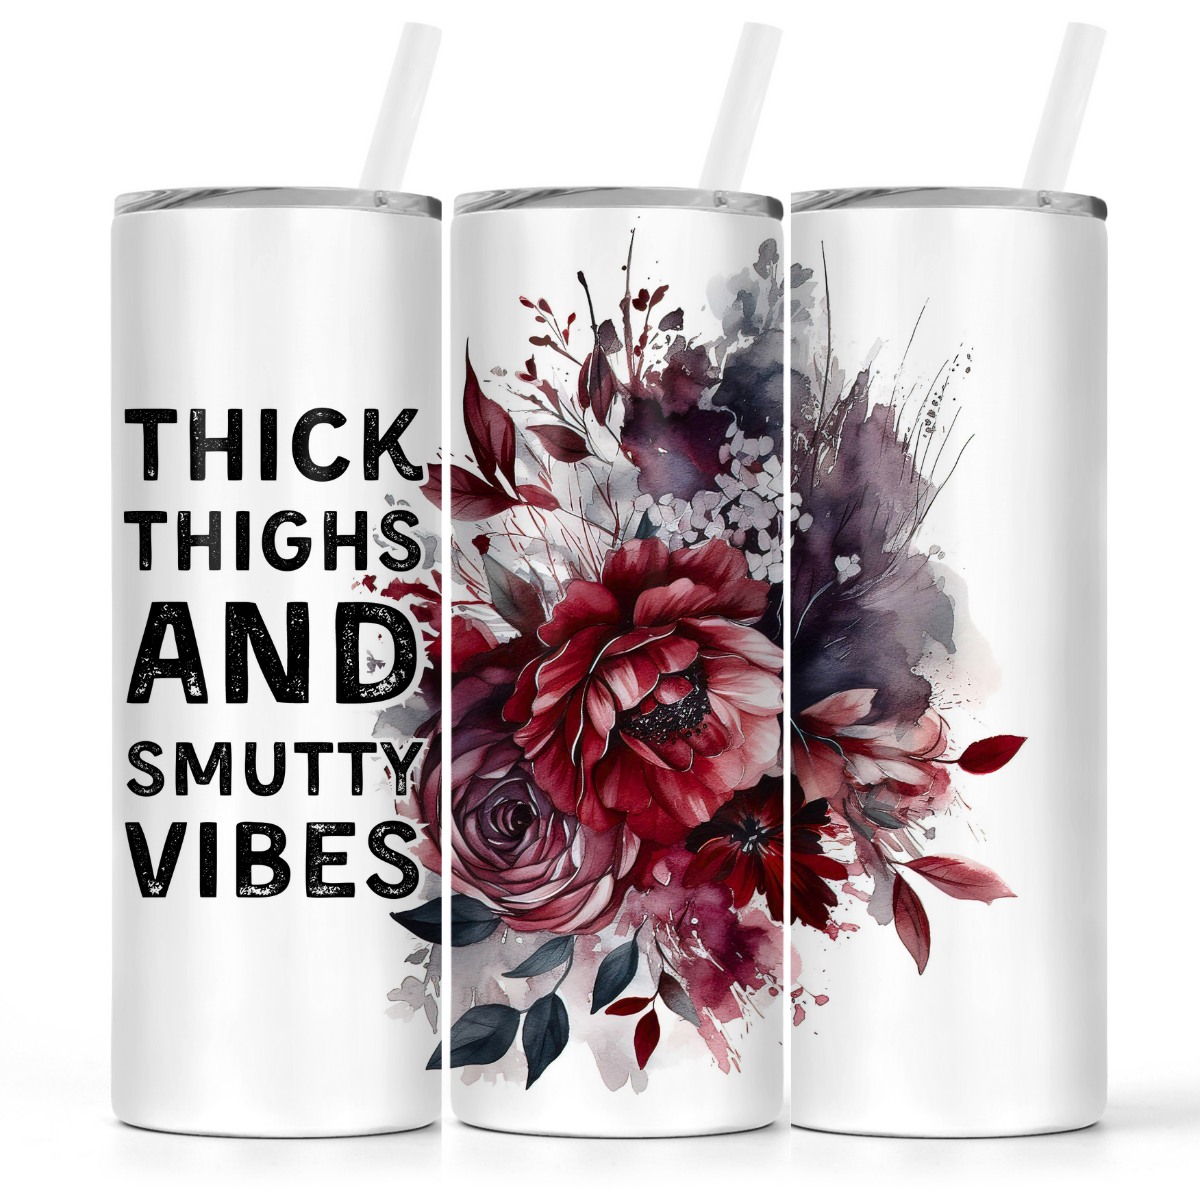 Thick Thighs And Smutty Vibes | Tumbler - The Pretty Things.ca